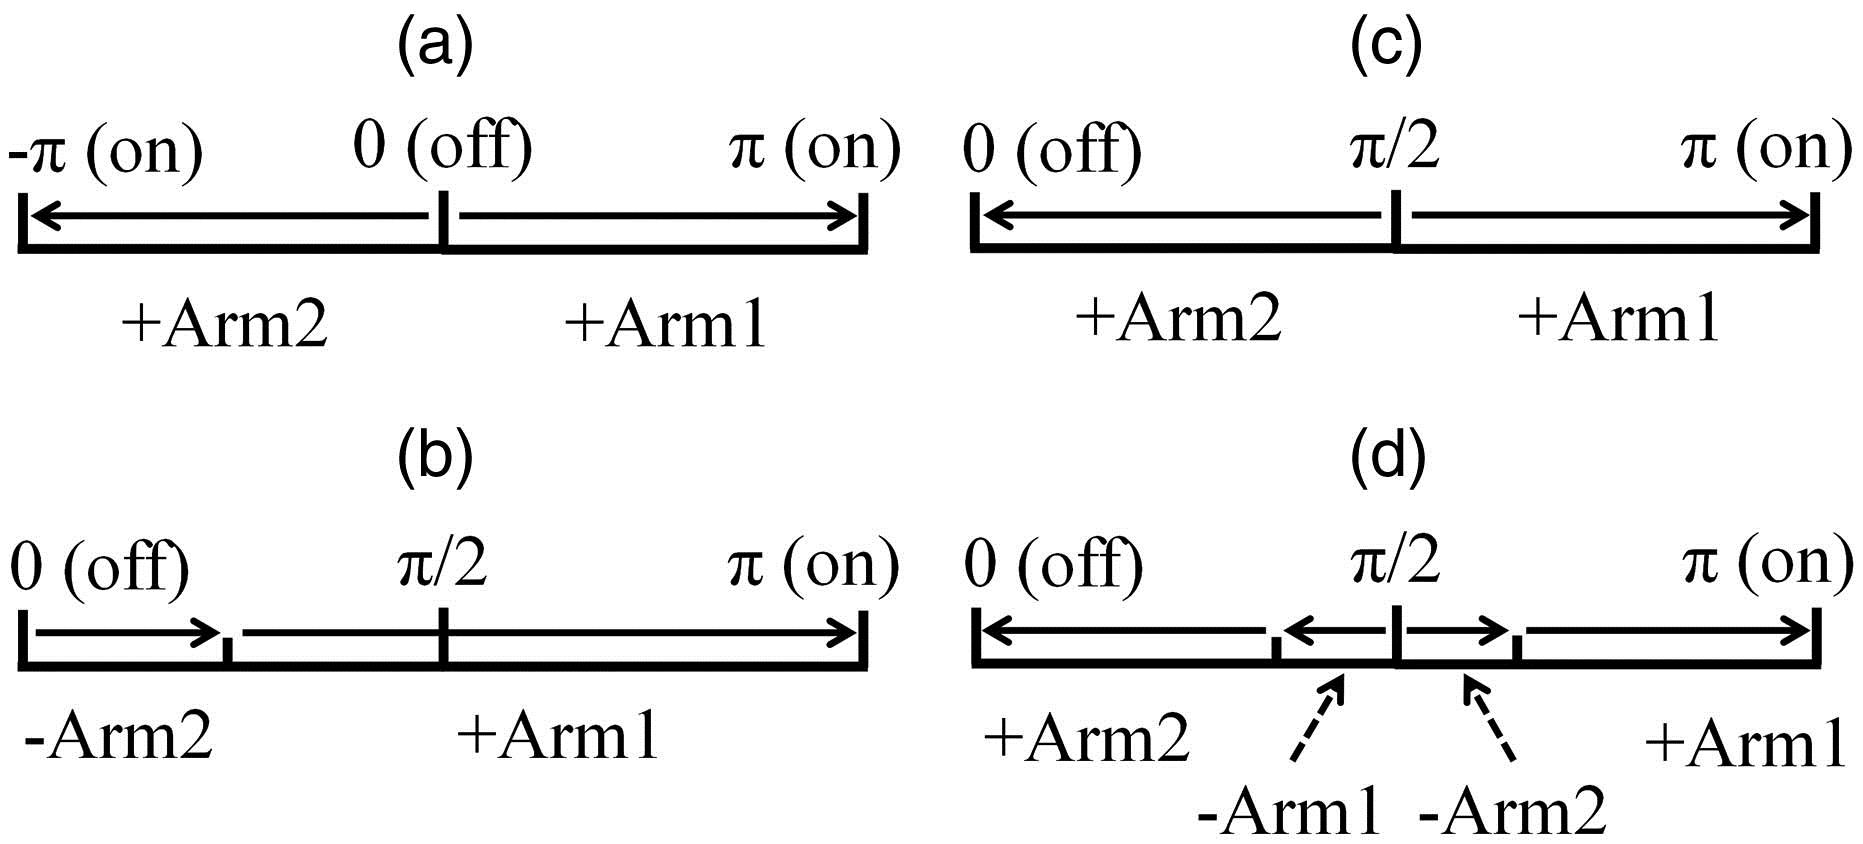 Schematic diagrams of different modulation schemes. (a) Single-arm modulation. (b) Push–pull modulation. (c) Double-arm modulation with a pre-biased π/2 phase shift. (d) Push–pull modulation with a pre-biased π/2 phase shift.